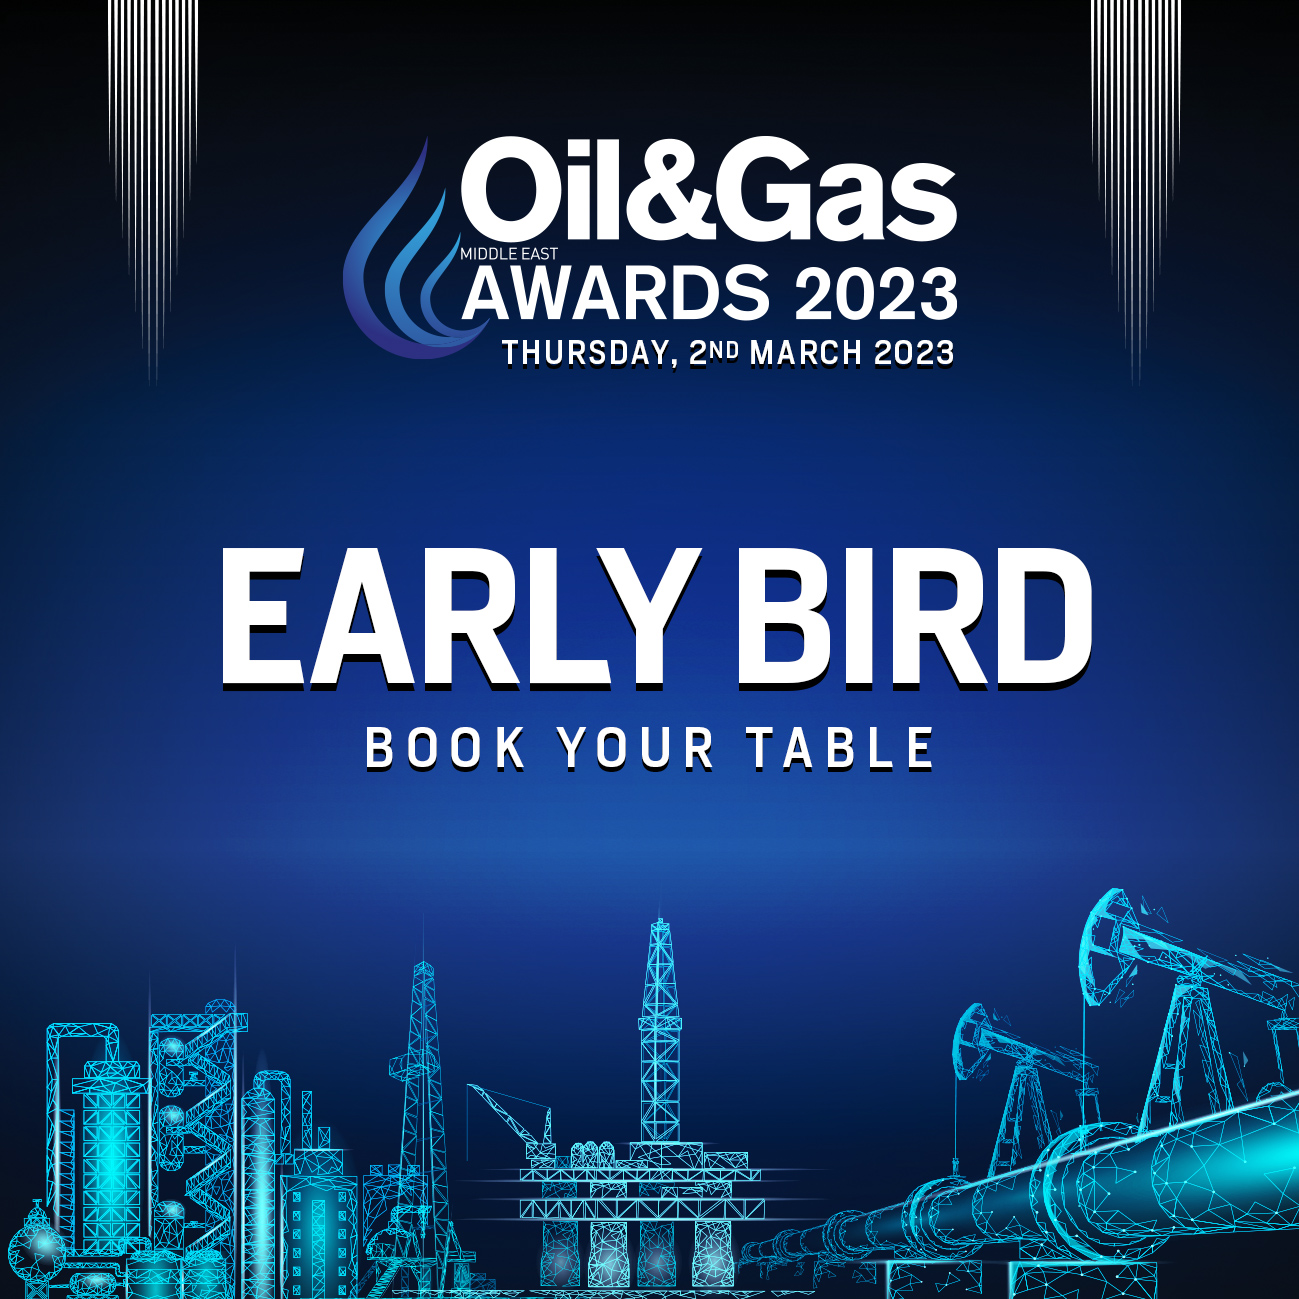 Oil & Gas Middle East Awards 2023 Early Bird offer closes on February